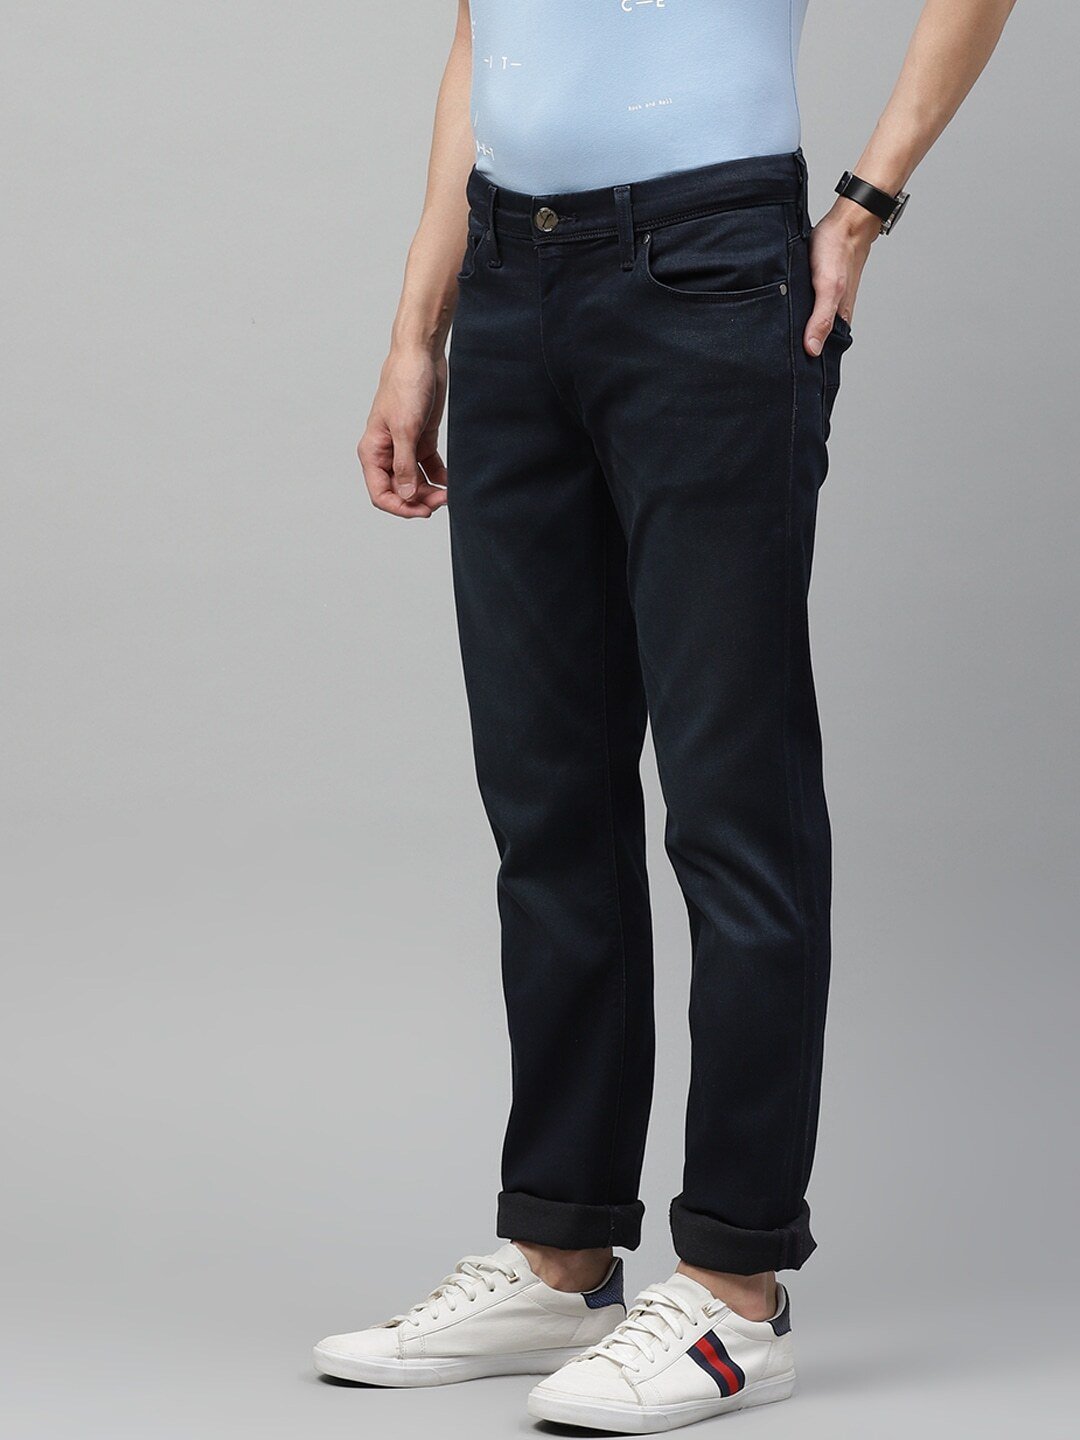 Men Black Solid Slim Fit Sustainable Stretchable Jeans-22573-0006